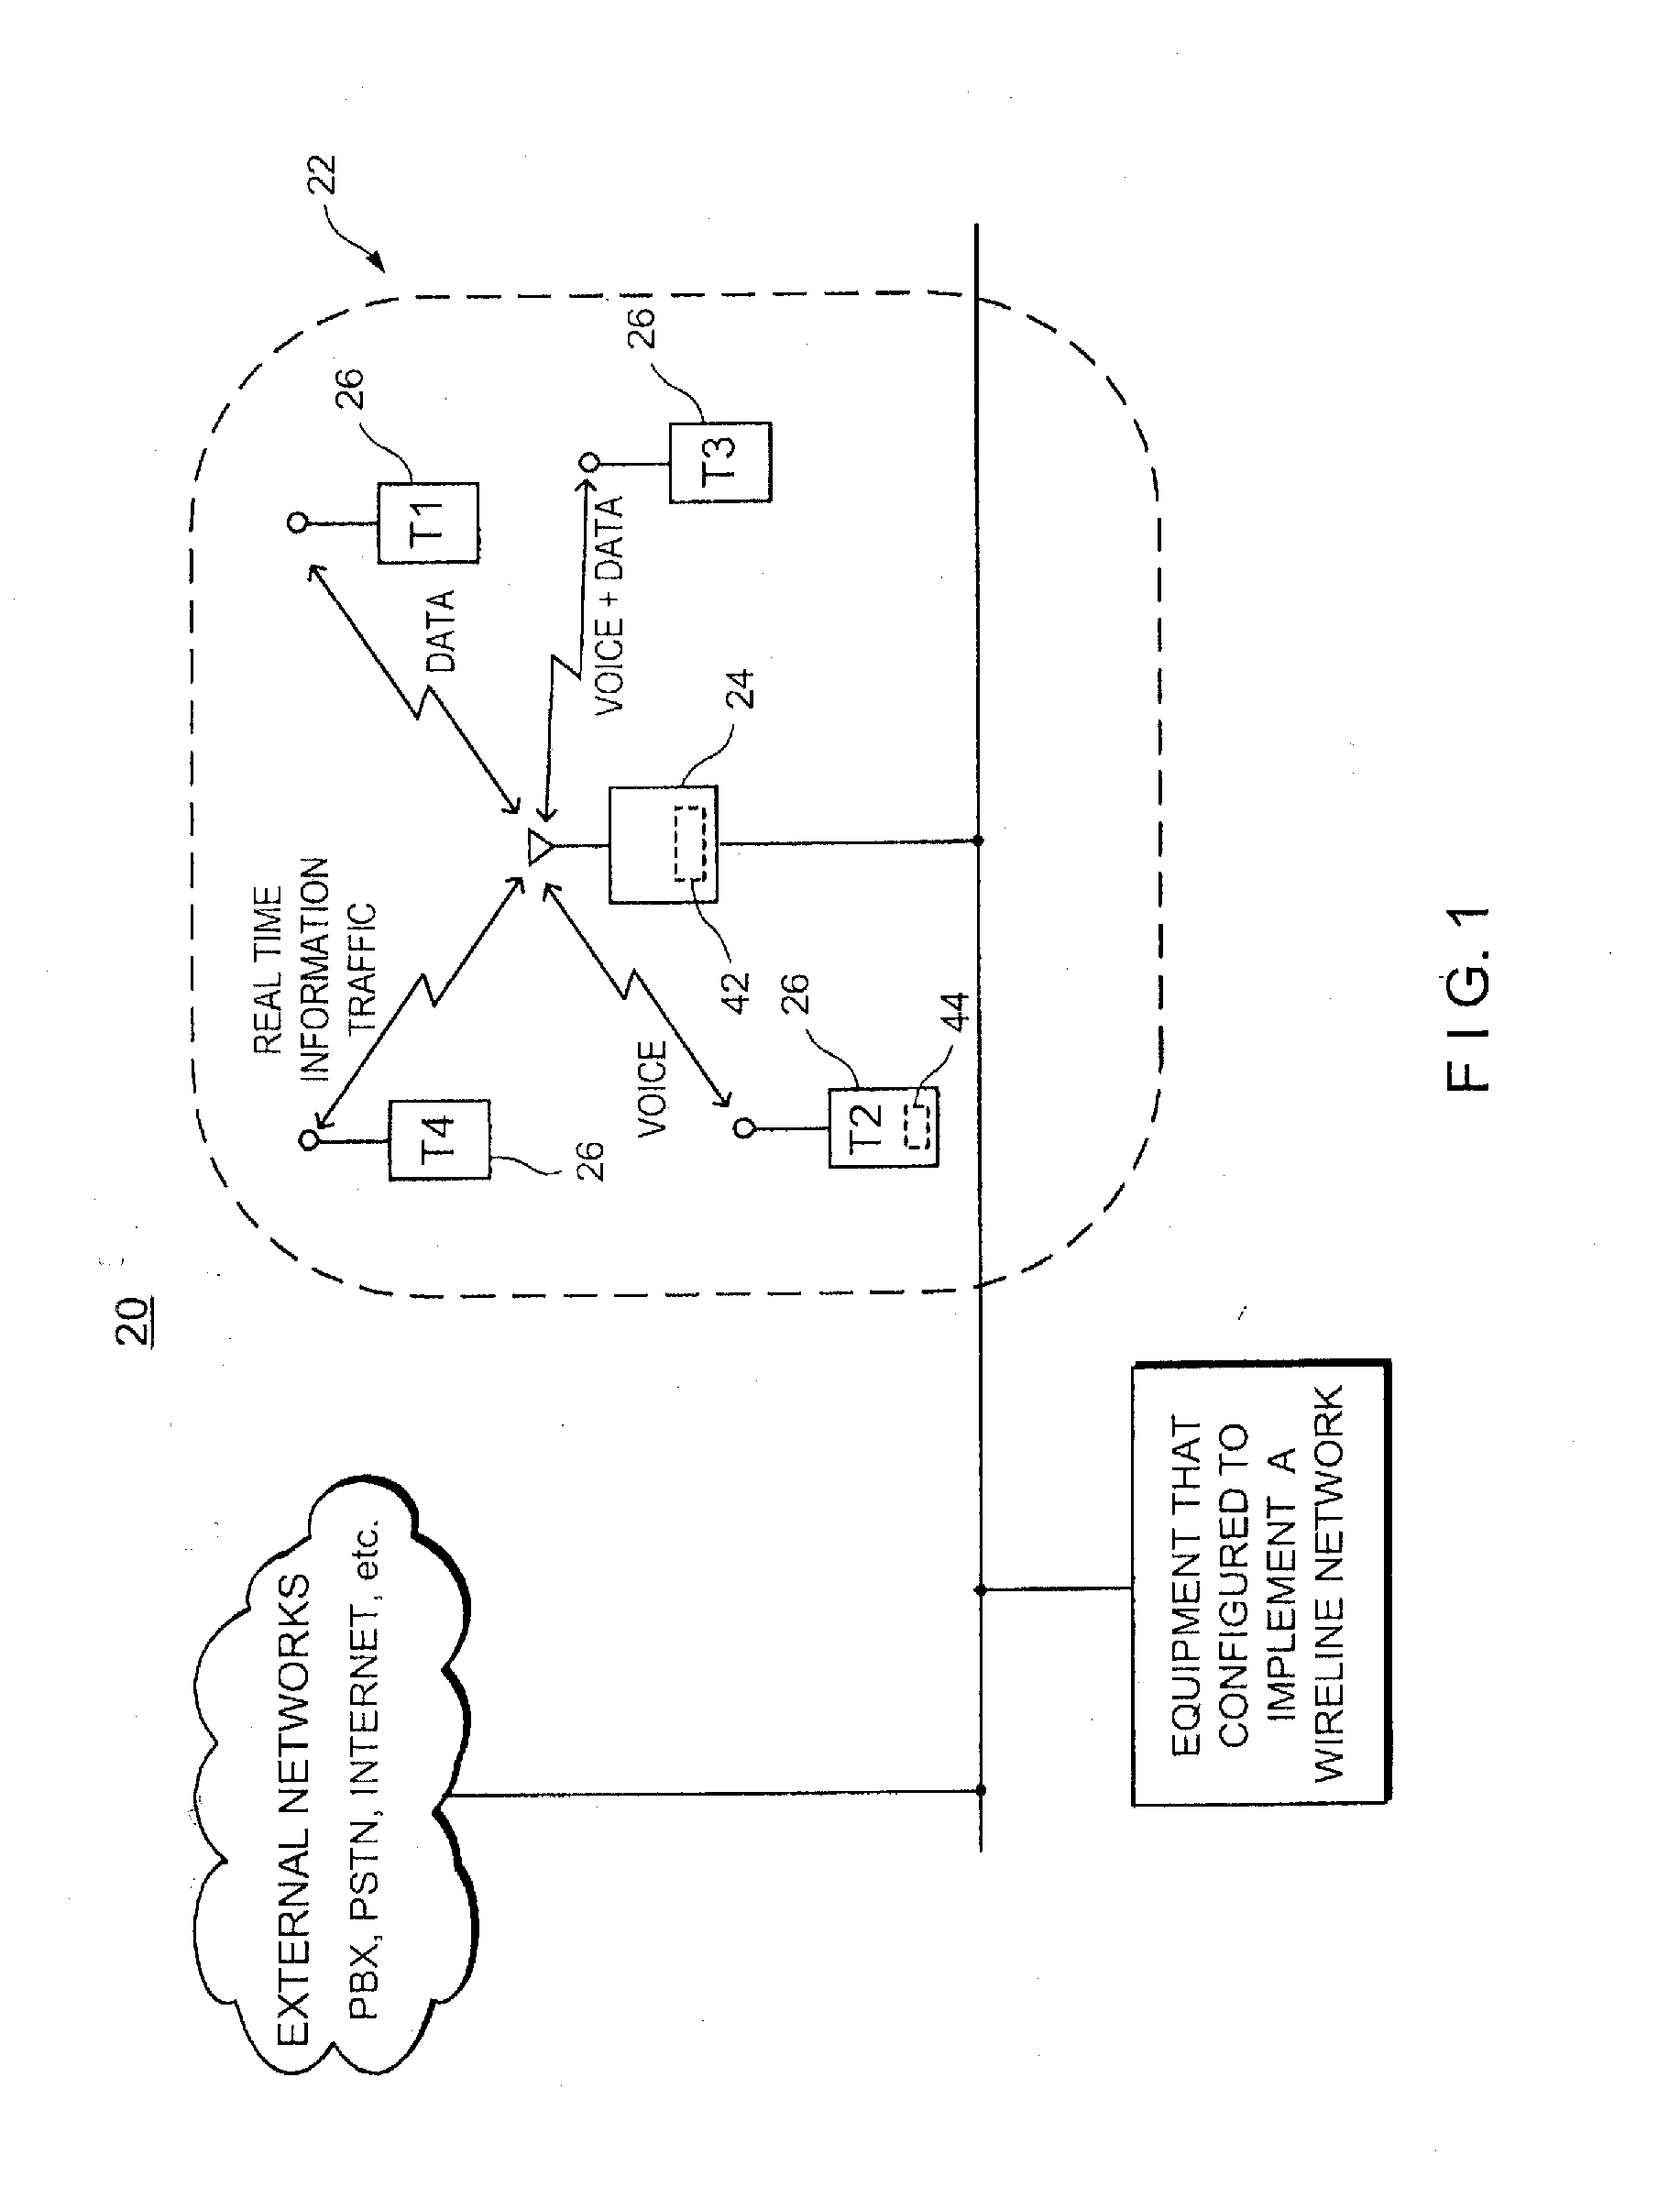 Apparatus and Method for Wireless Local Area Networks of Different Countries